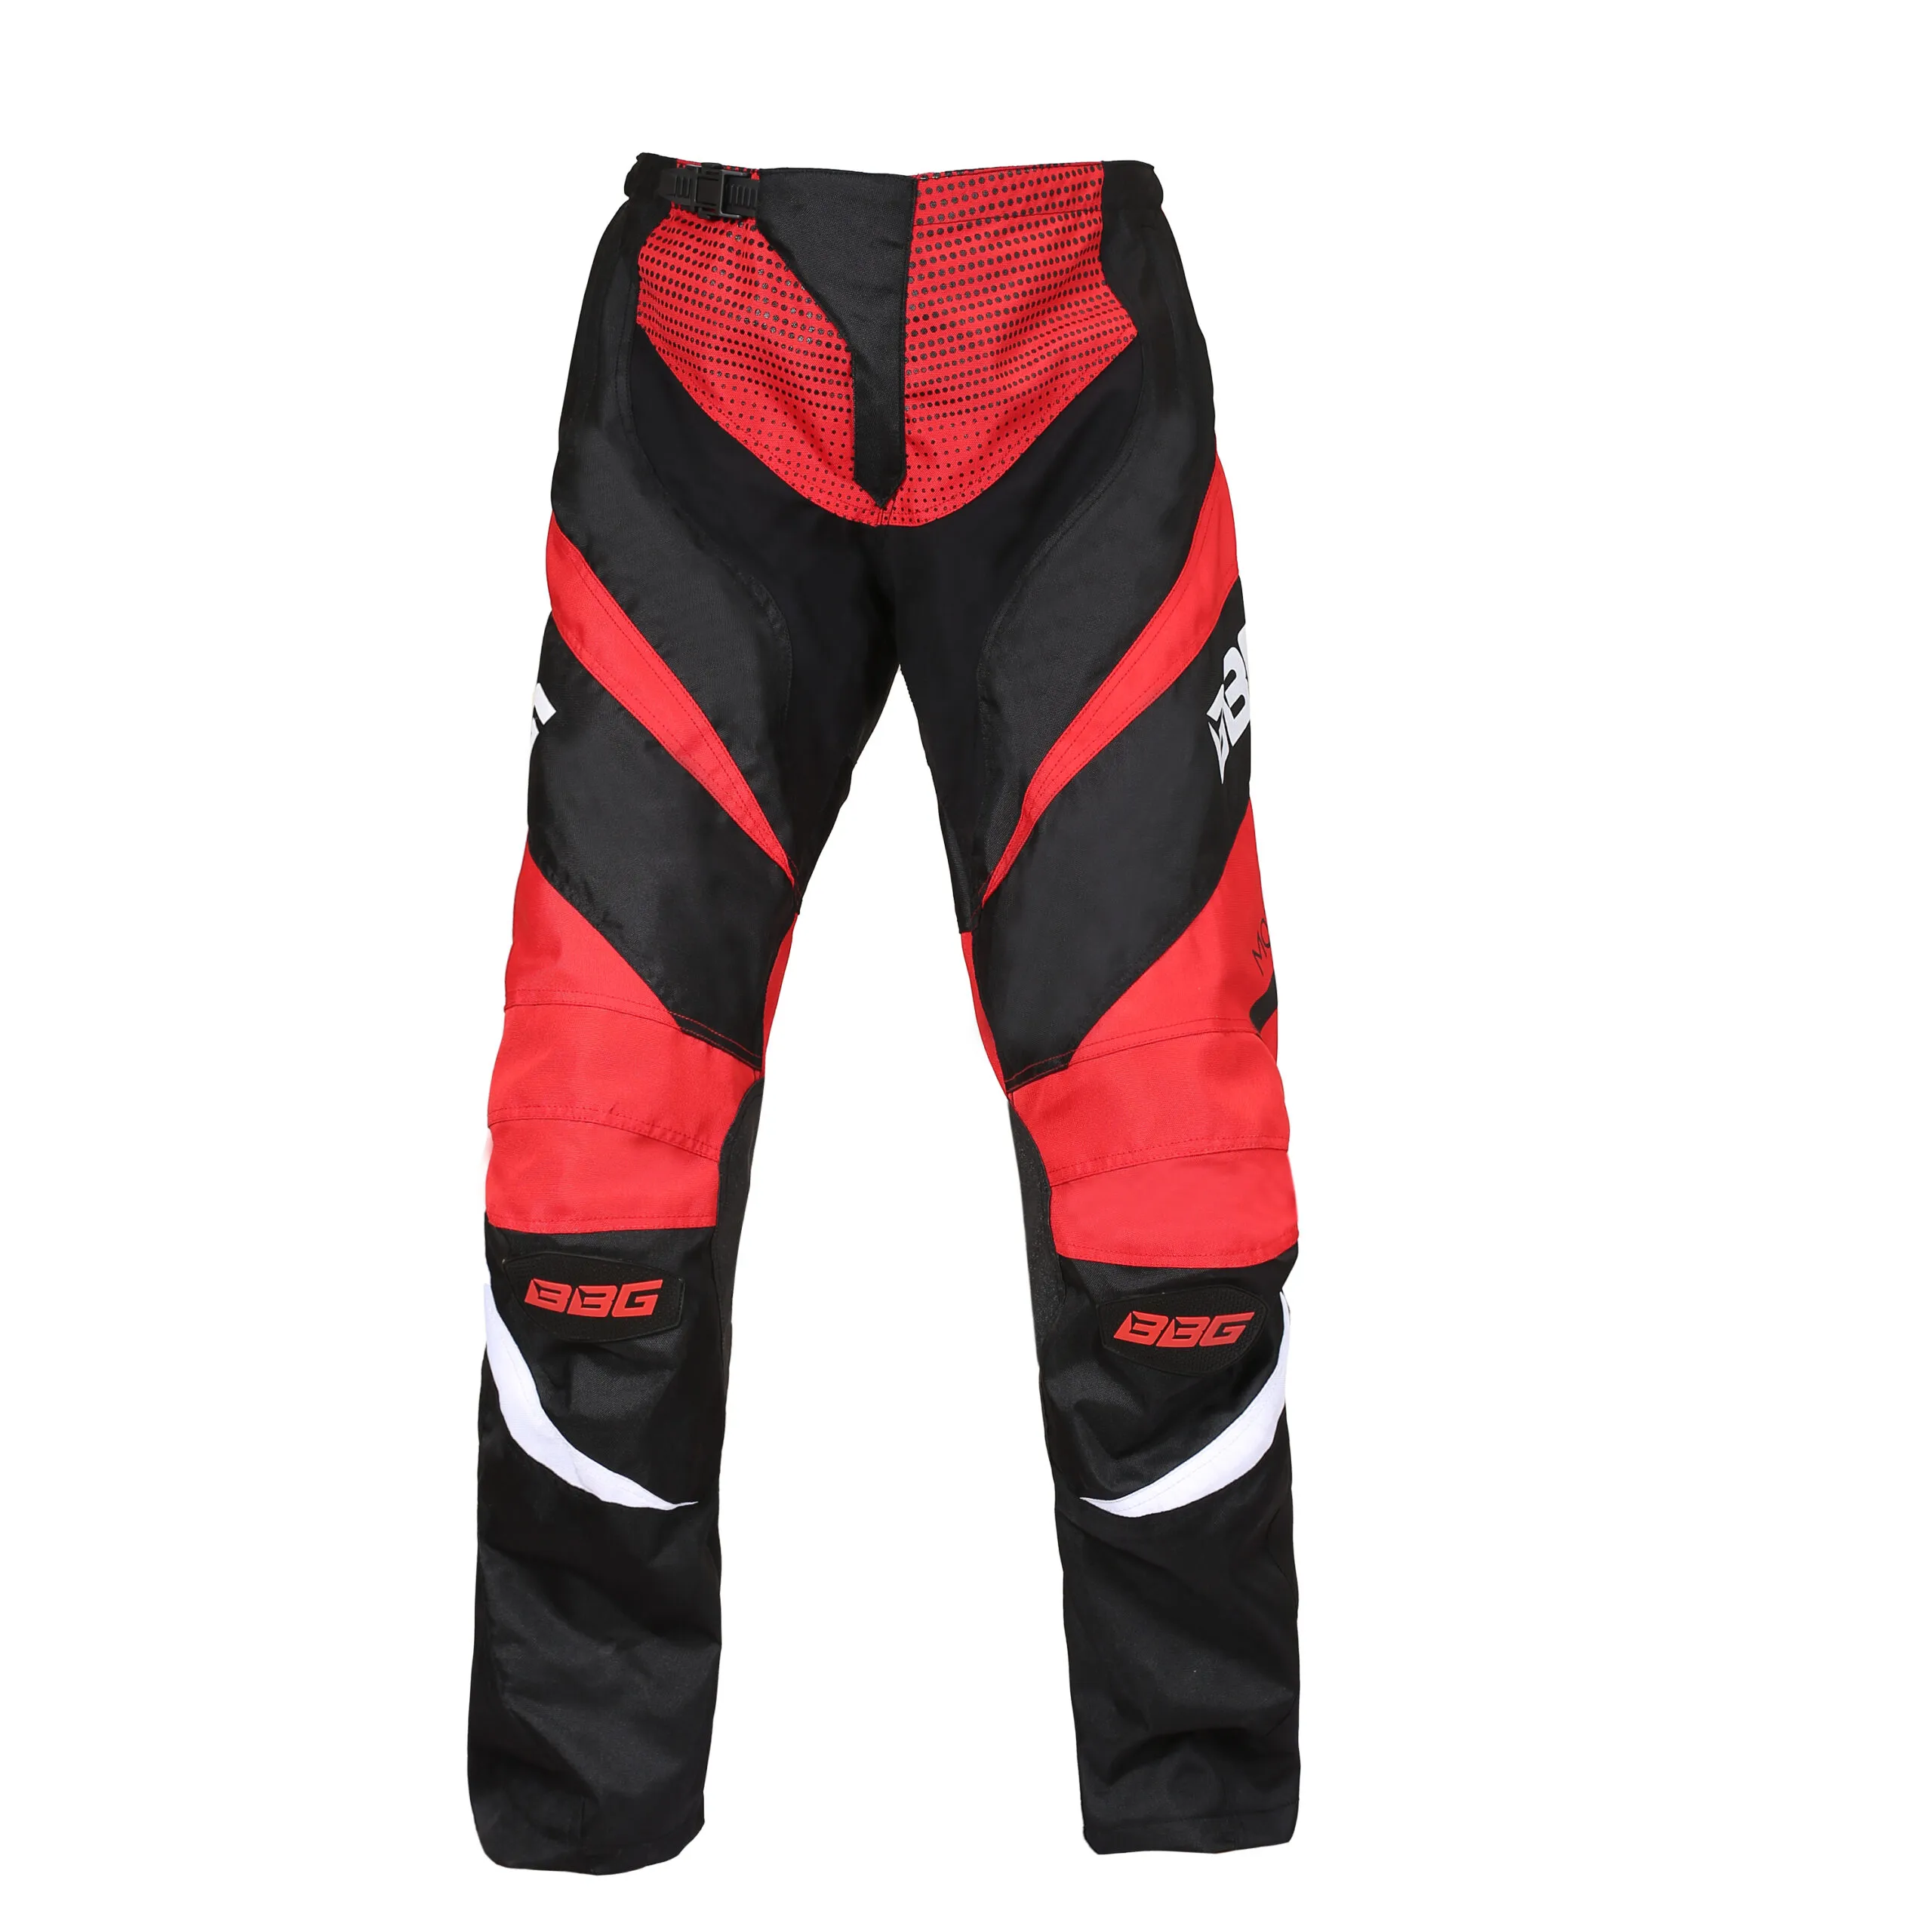 Motorcycle Gear for Cold Weather Riding - Rider Justice